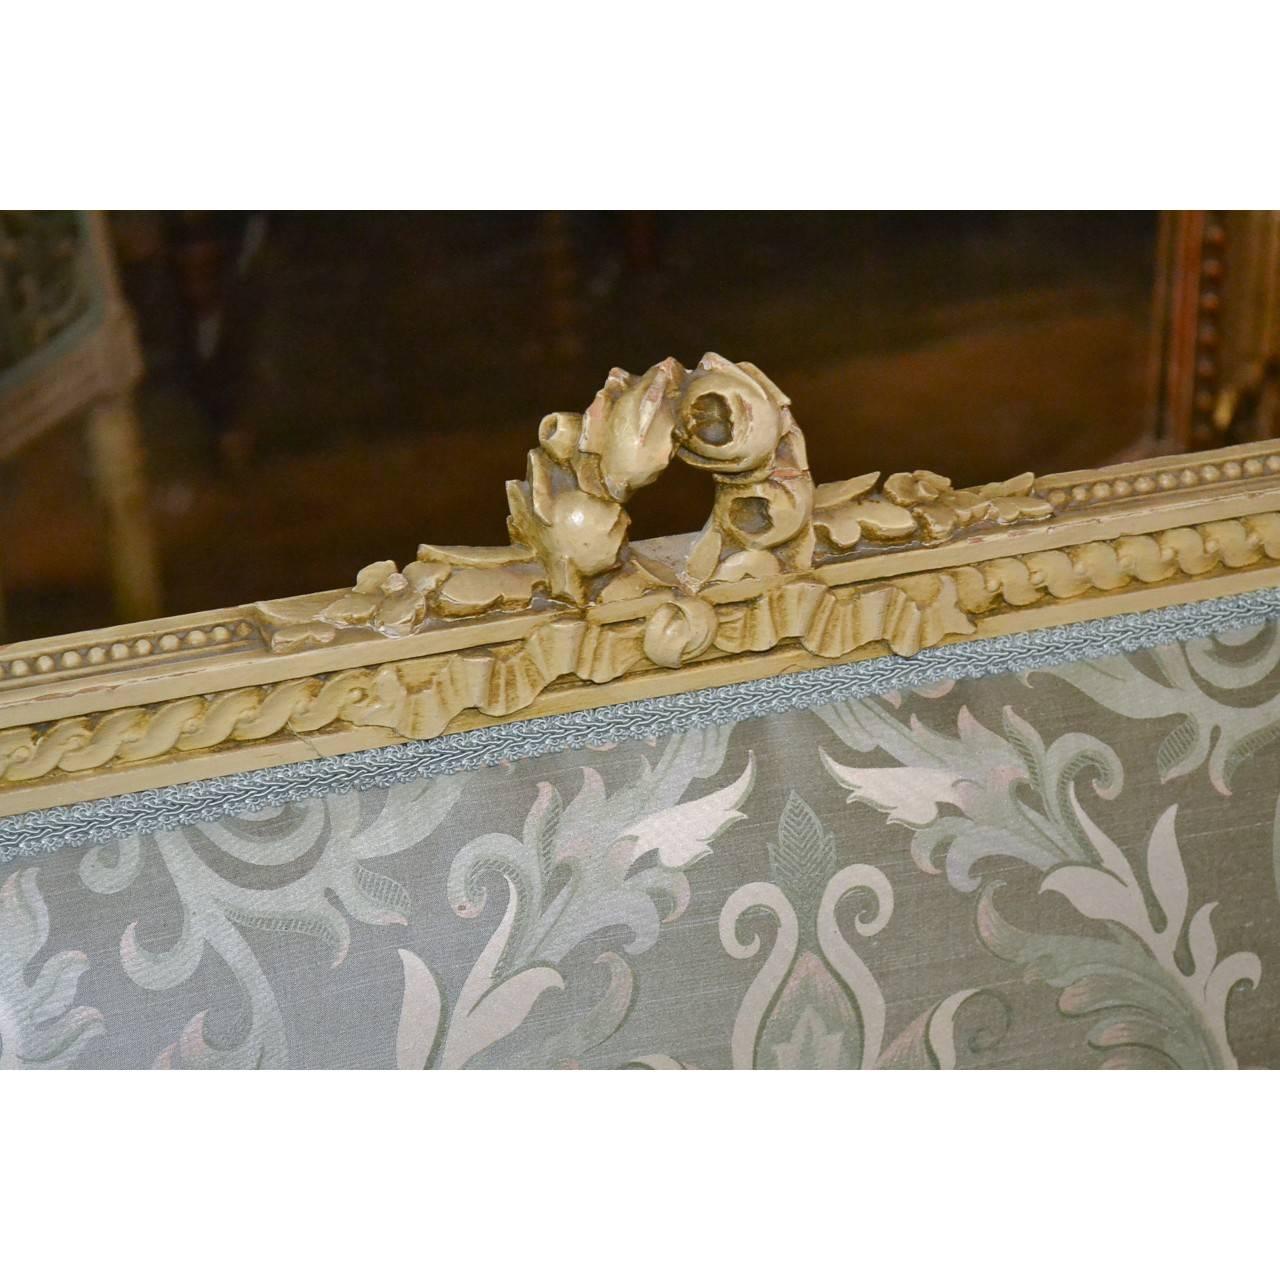 Gorgeous 19th century Louis XVI carved and painted settee with luxurious silk upholstery,

circa 1890

Measure: 63 inches wide x 21 inches deep x 32 inches height
top of seat cushion to floor is 14 inches
frame under cushion to floor is 11